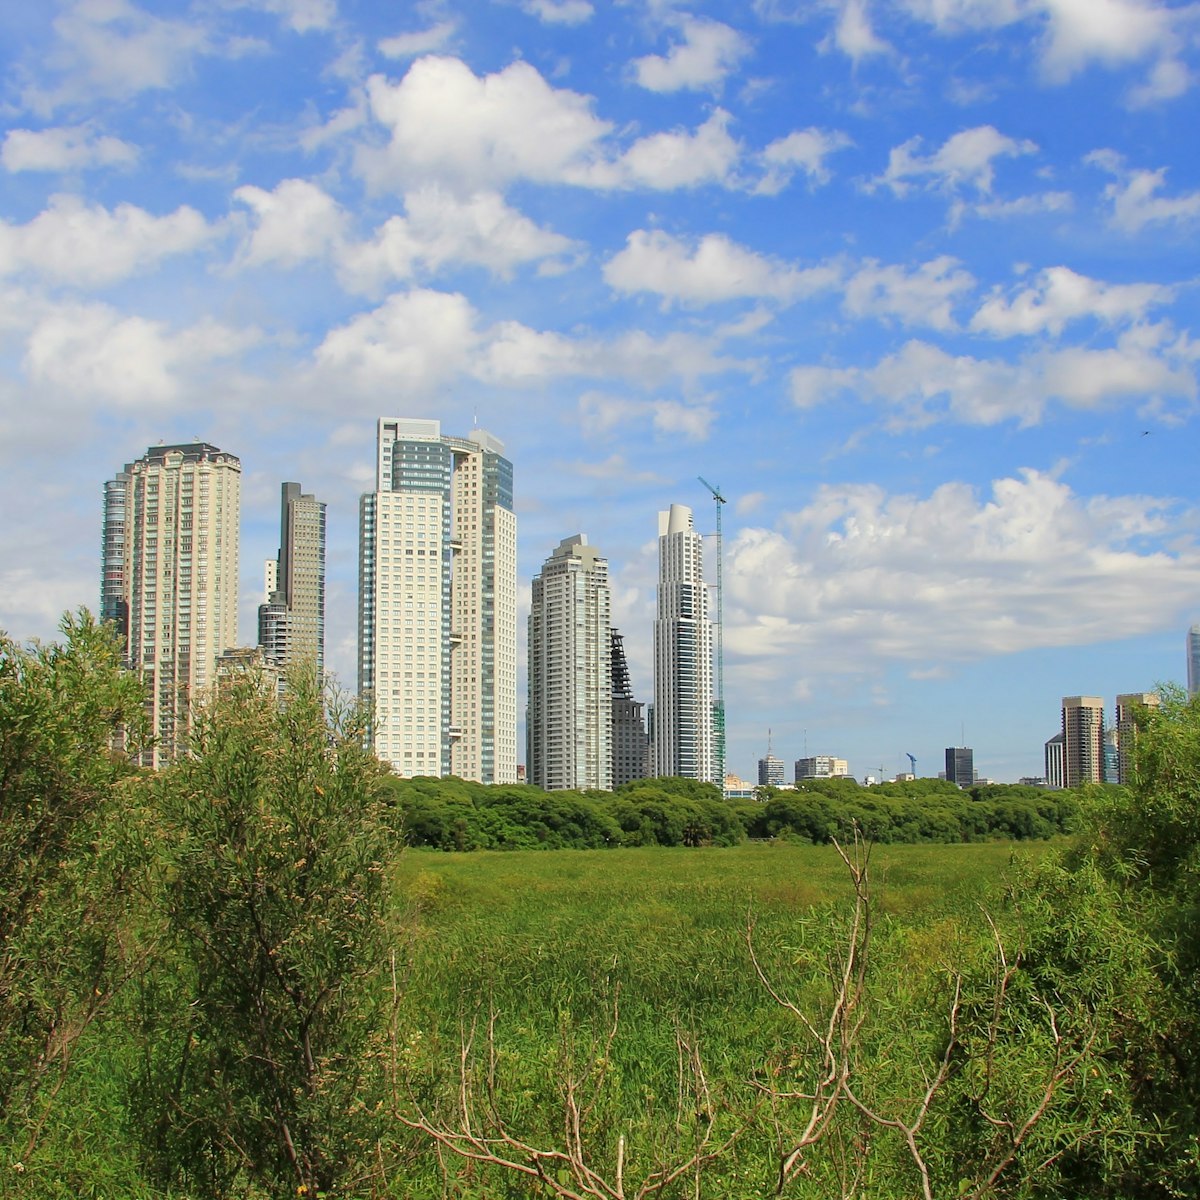 [UNVERIFIED CONTENT] Show a view of the city from this amazing reserve. Amazing place to view wildlife and flowers. Also, a park used by the locals for walking, jogging, picnicking and relaxing.